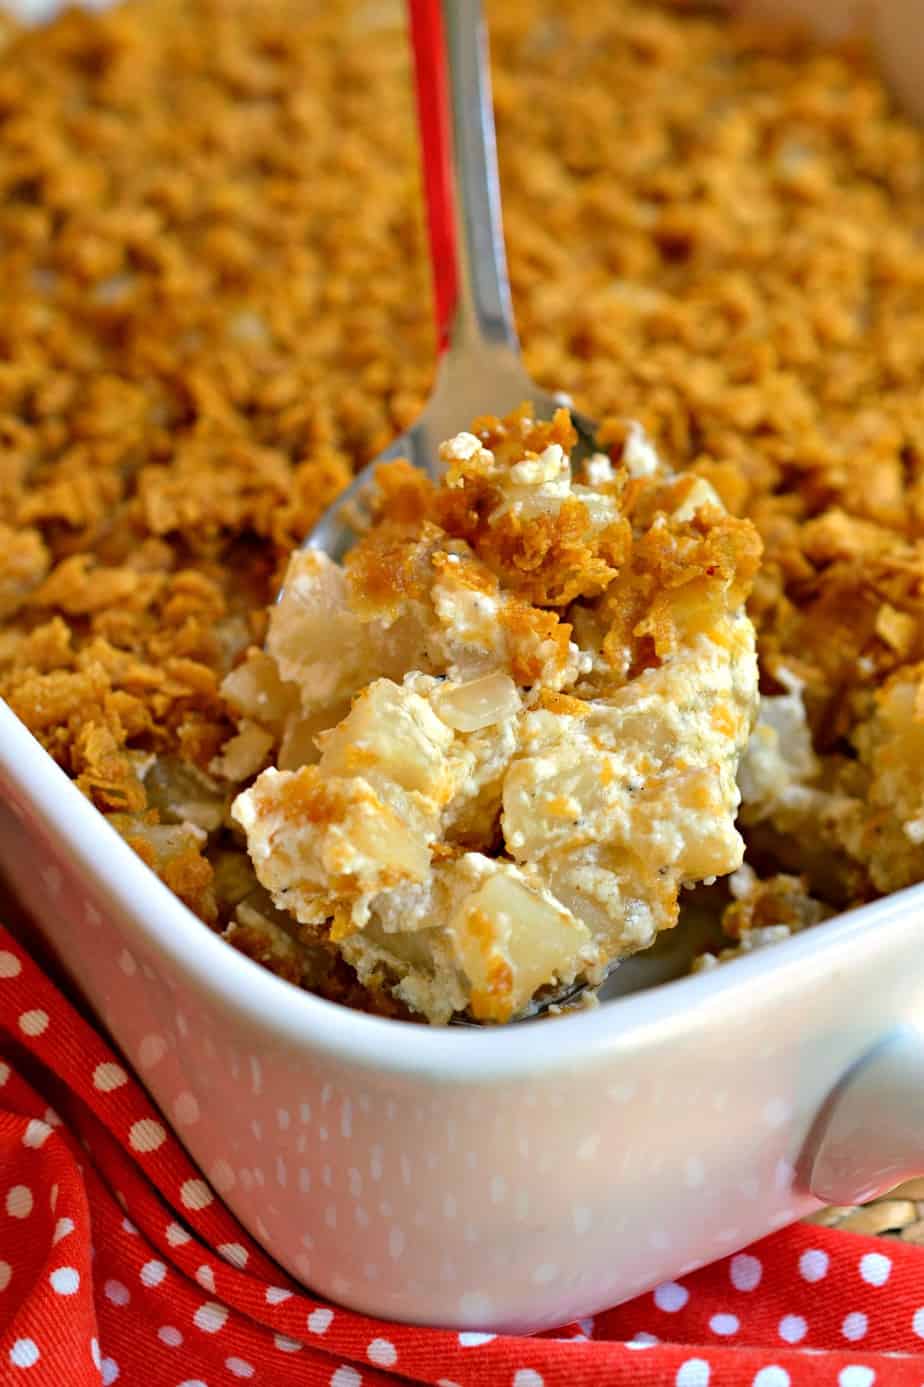 Bake a batch of these Funeral Potatoes and take them to your next potluck or family reunion.